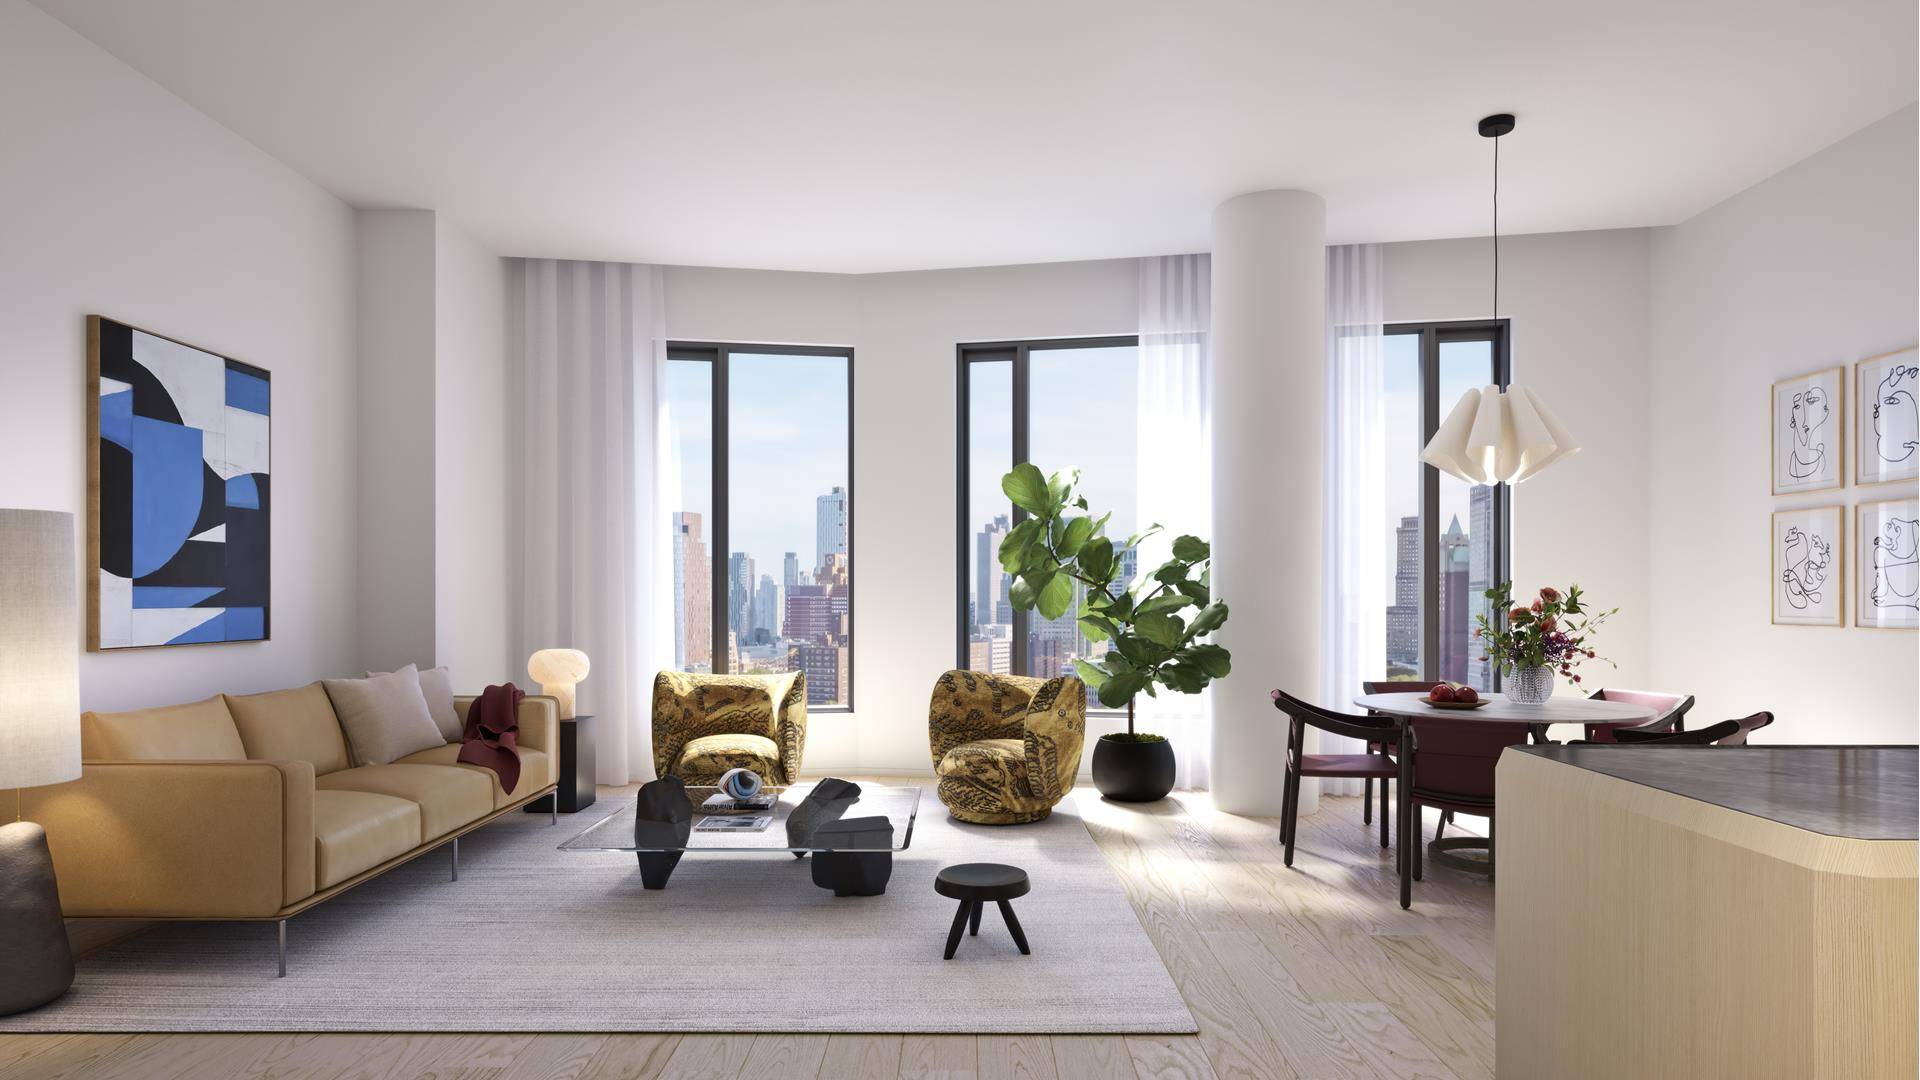 With views of Front Street and the Manhattan Bridge, this 2, 190 SF three bedroom plus, three and a half bathroom residence is the definition of elite living and modern ...